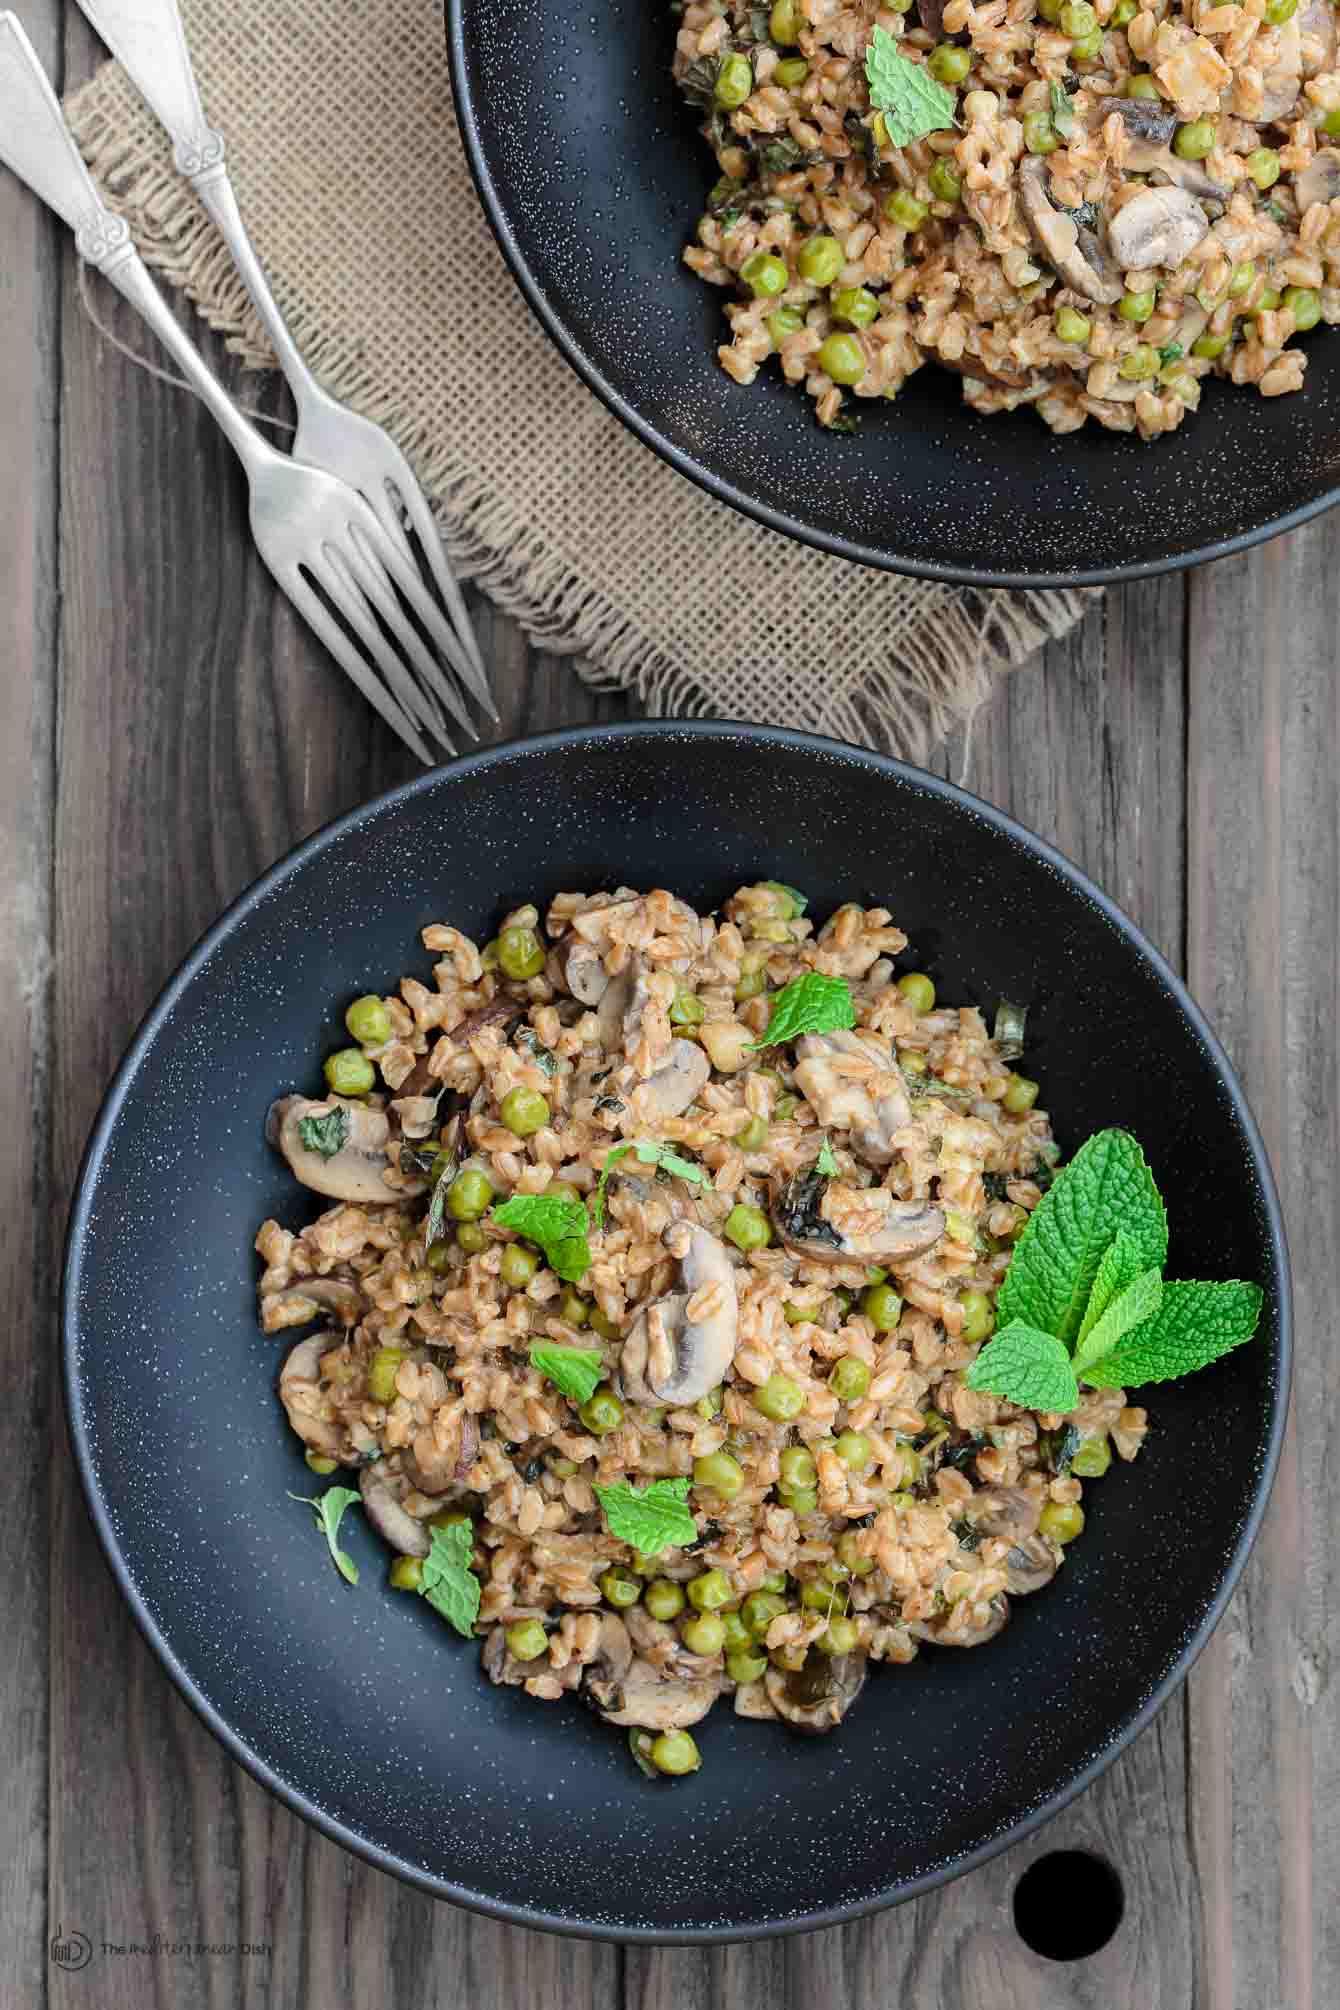 Two servings of Farro with Mushrooms and Peas